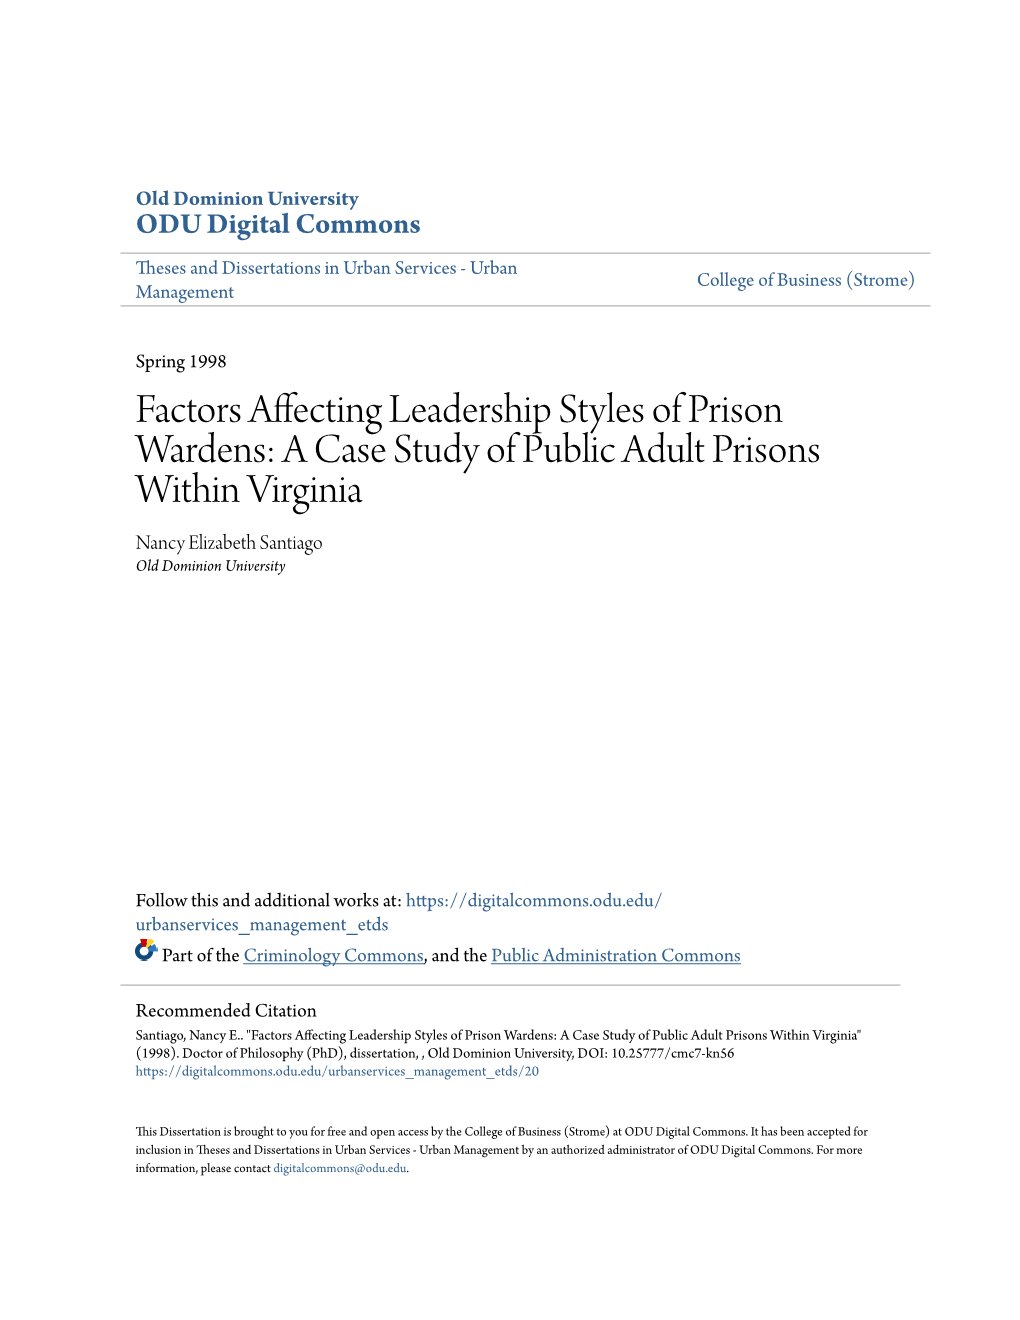 Factors Affecting Leadership Styles of Prison Wardens: a Case Study of Public Adult Prisons Within Virginia Nancy Elizabeth Santiago Old Dominion University